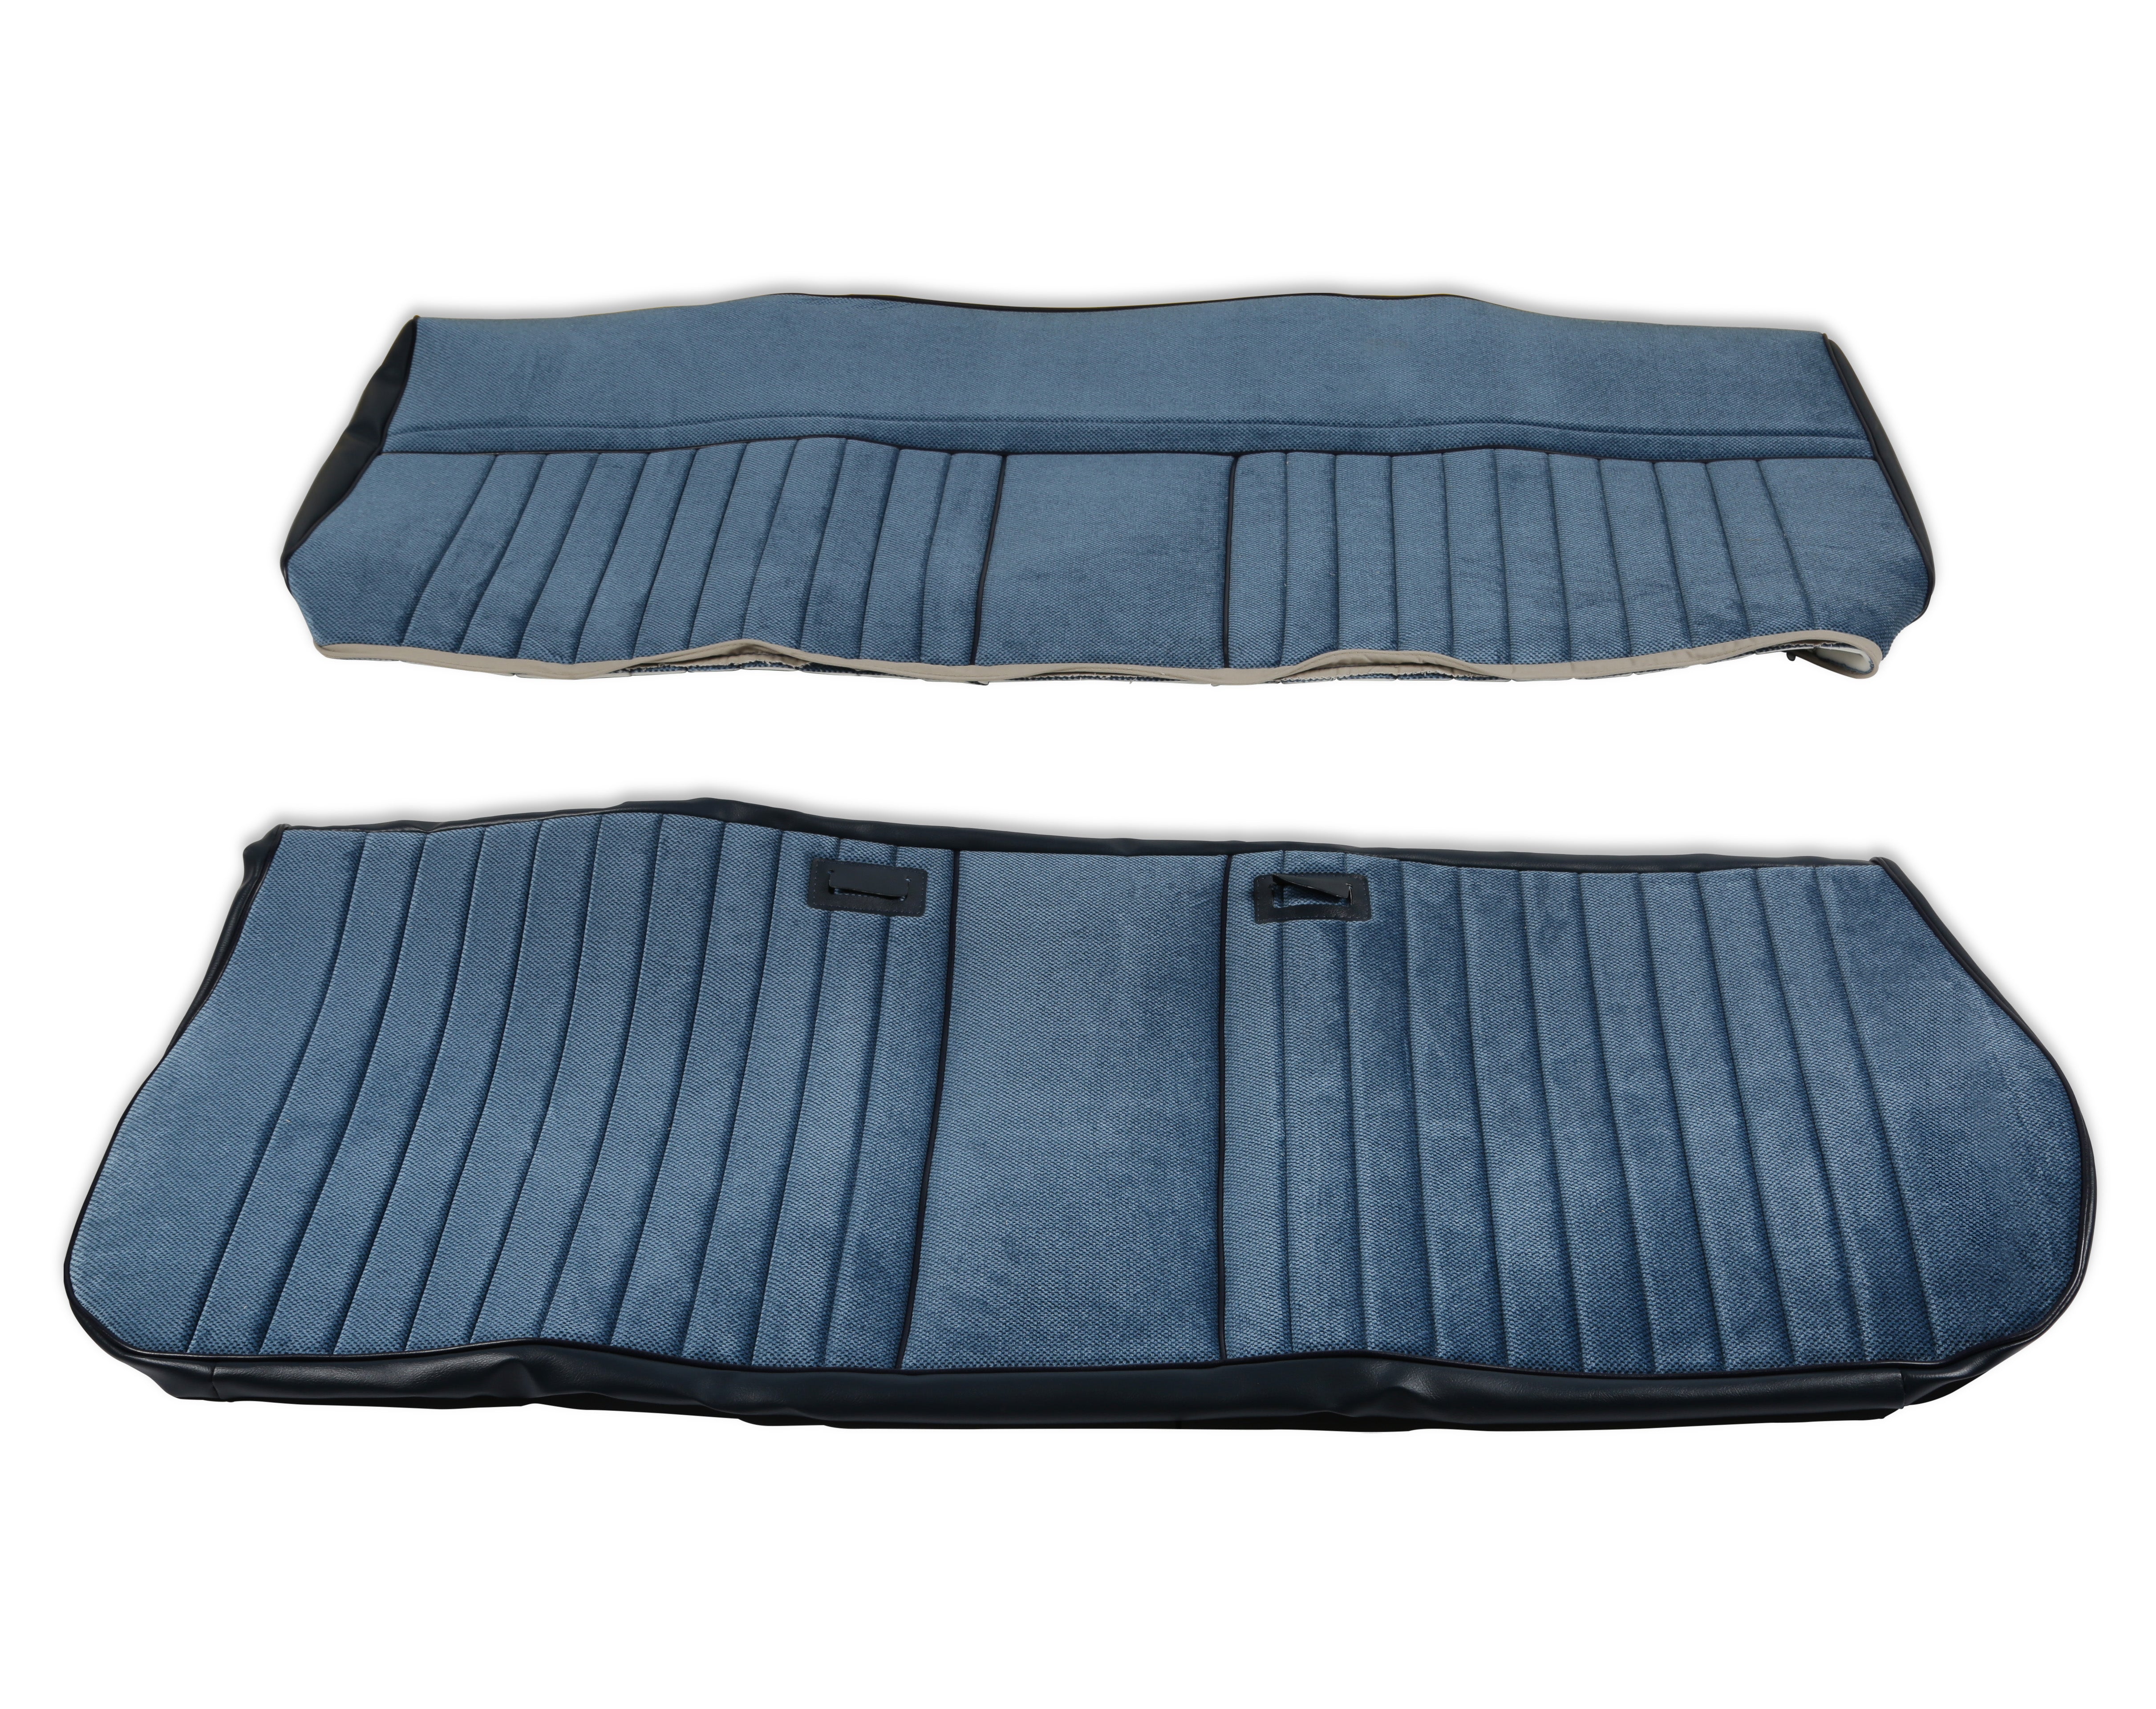 BROTHERS C/K Seat Upholstery Kit - Deluxe Pleat Cloth/Vinyl - Navy pn 05-322